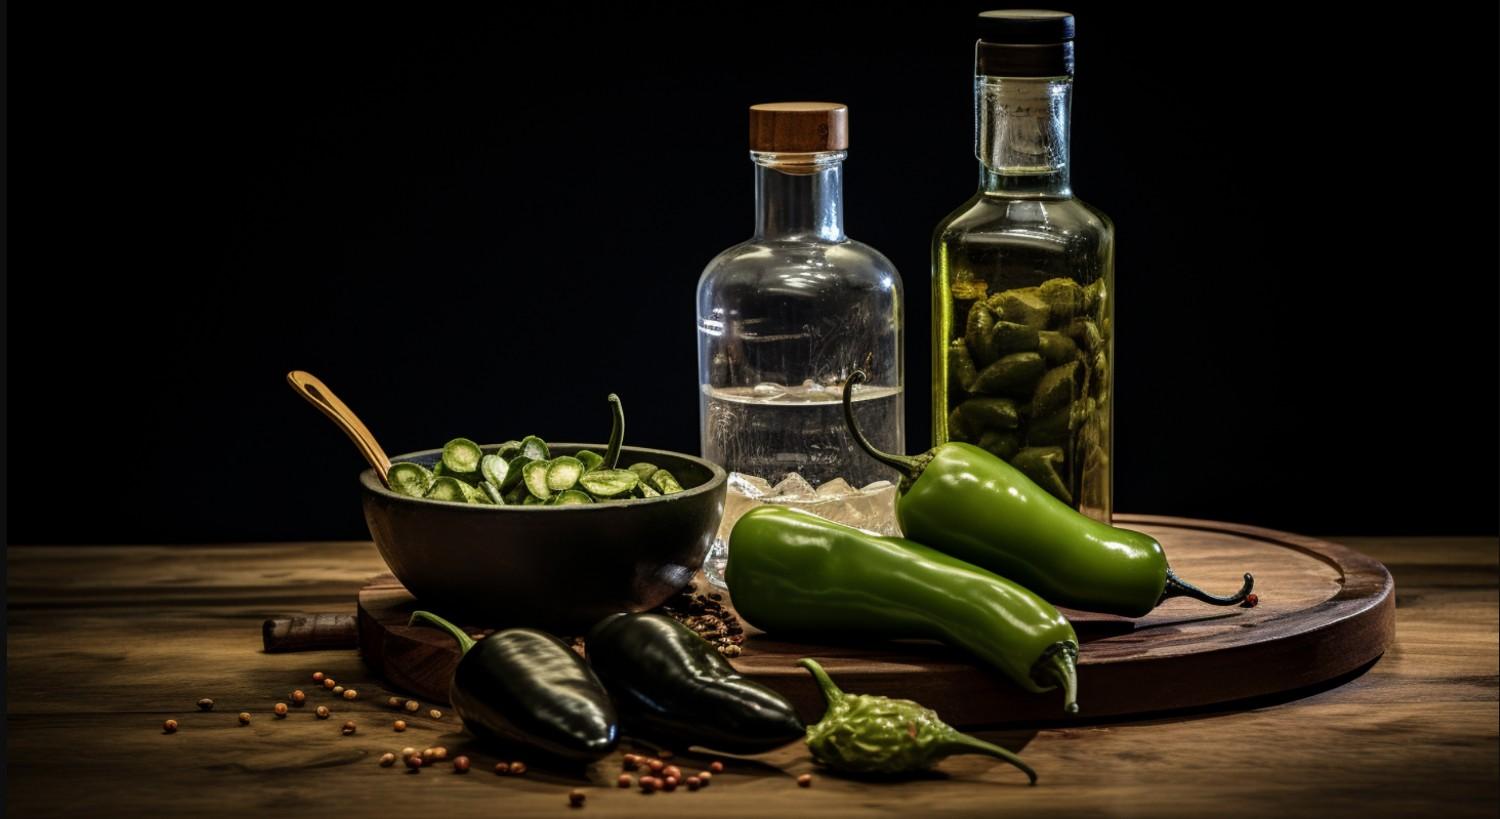 Jalapeño and Balsamic Vinegar: A Vodka Adventure for the Bold